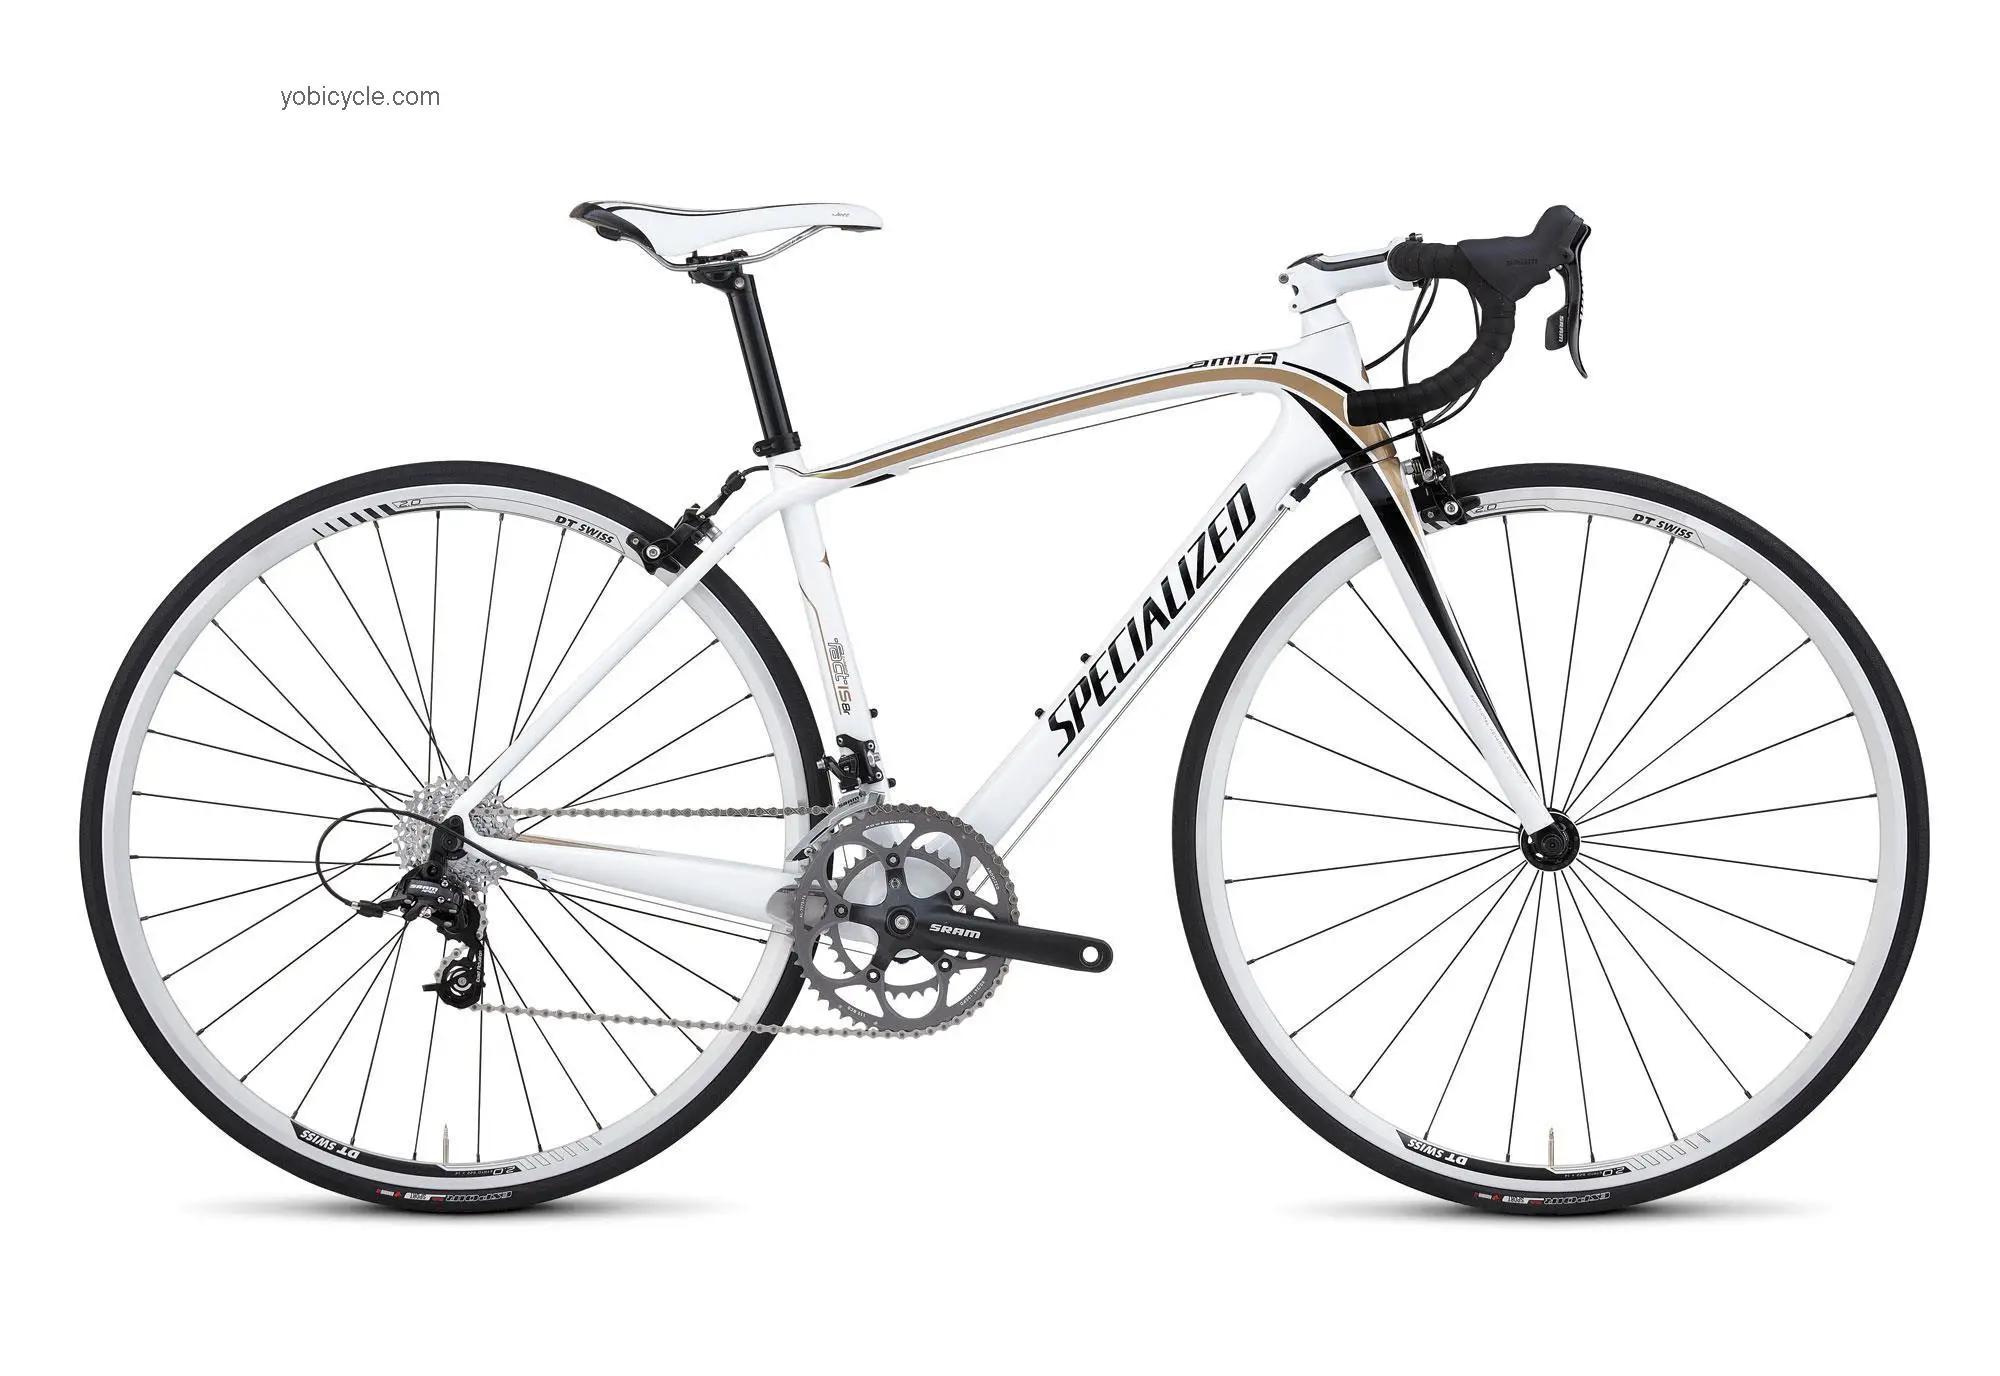 Specialized Amira Compact Apex 2012 comparison online with competitors